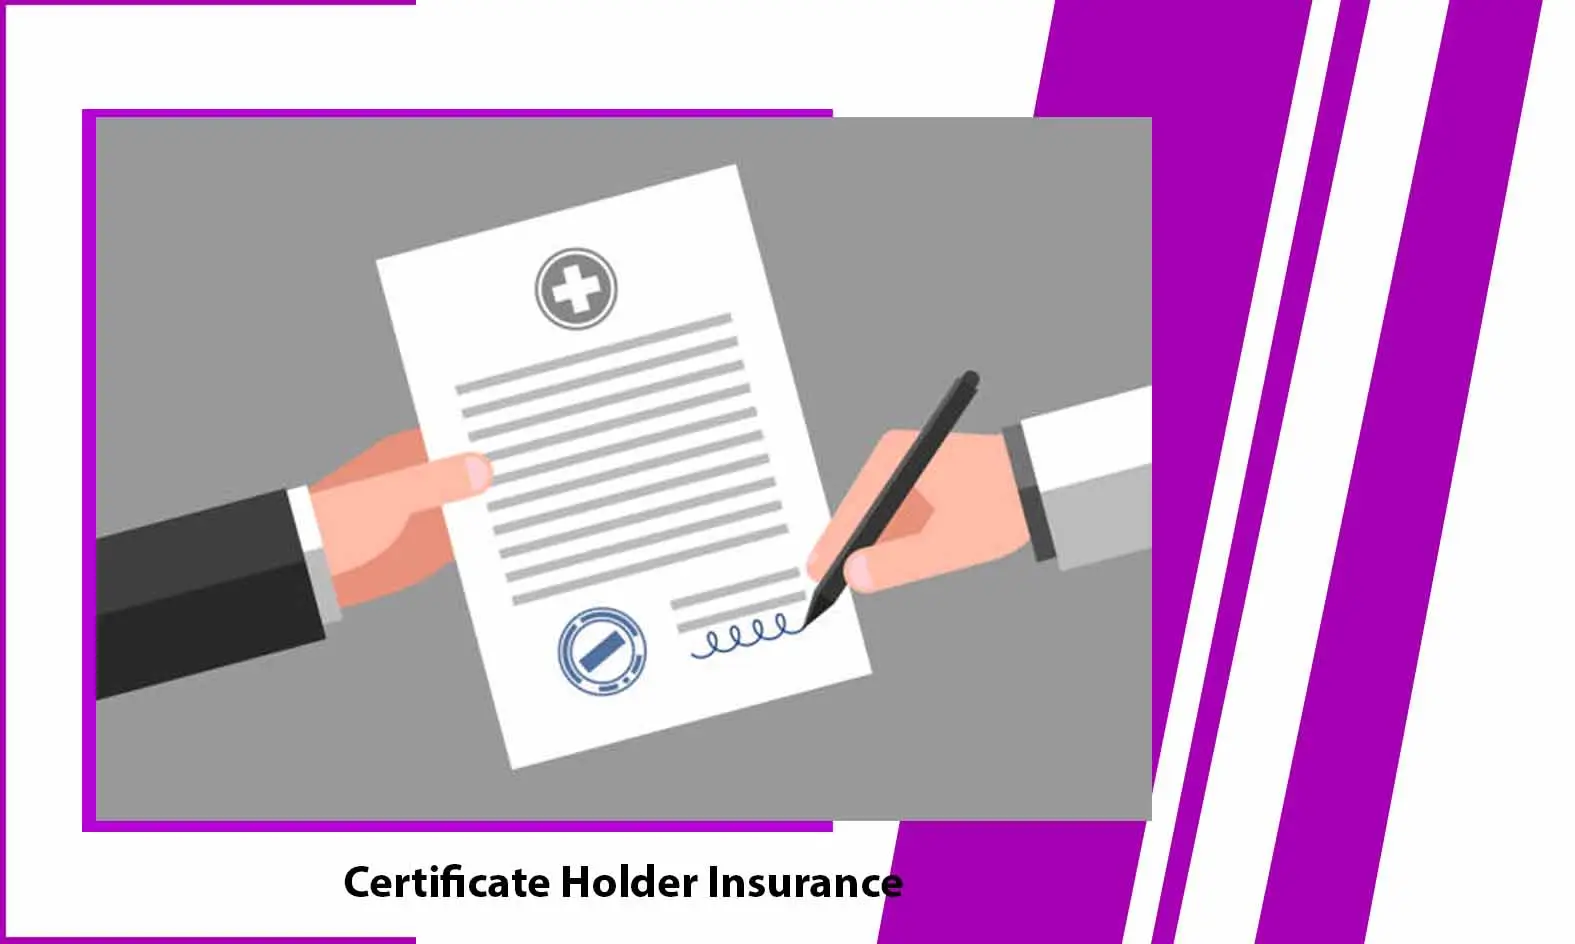 Certificate Holder Insurance - Roles and Responsibilities